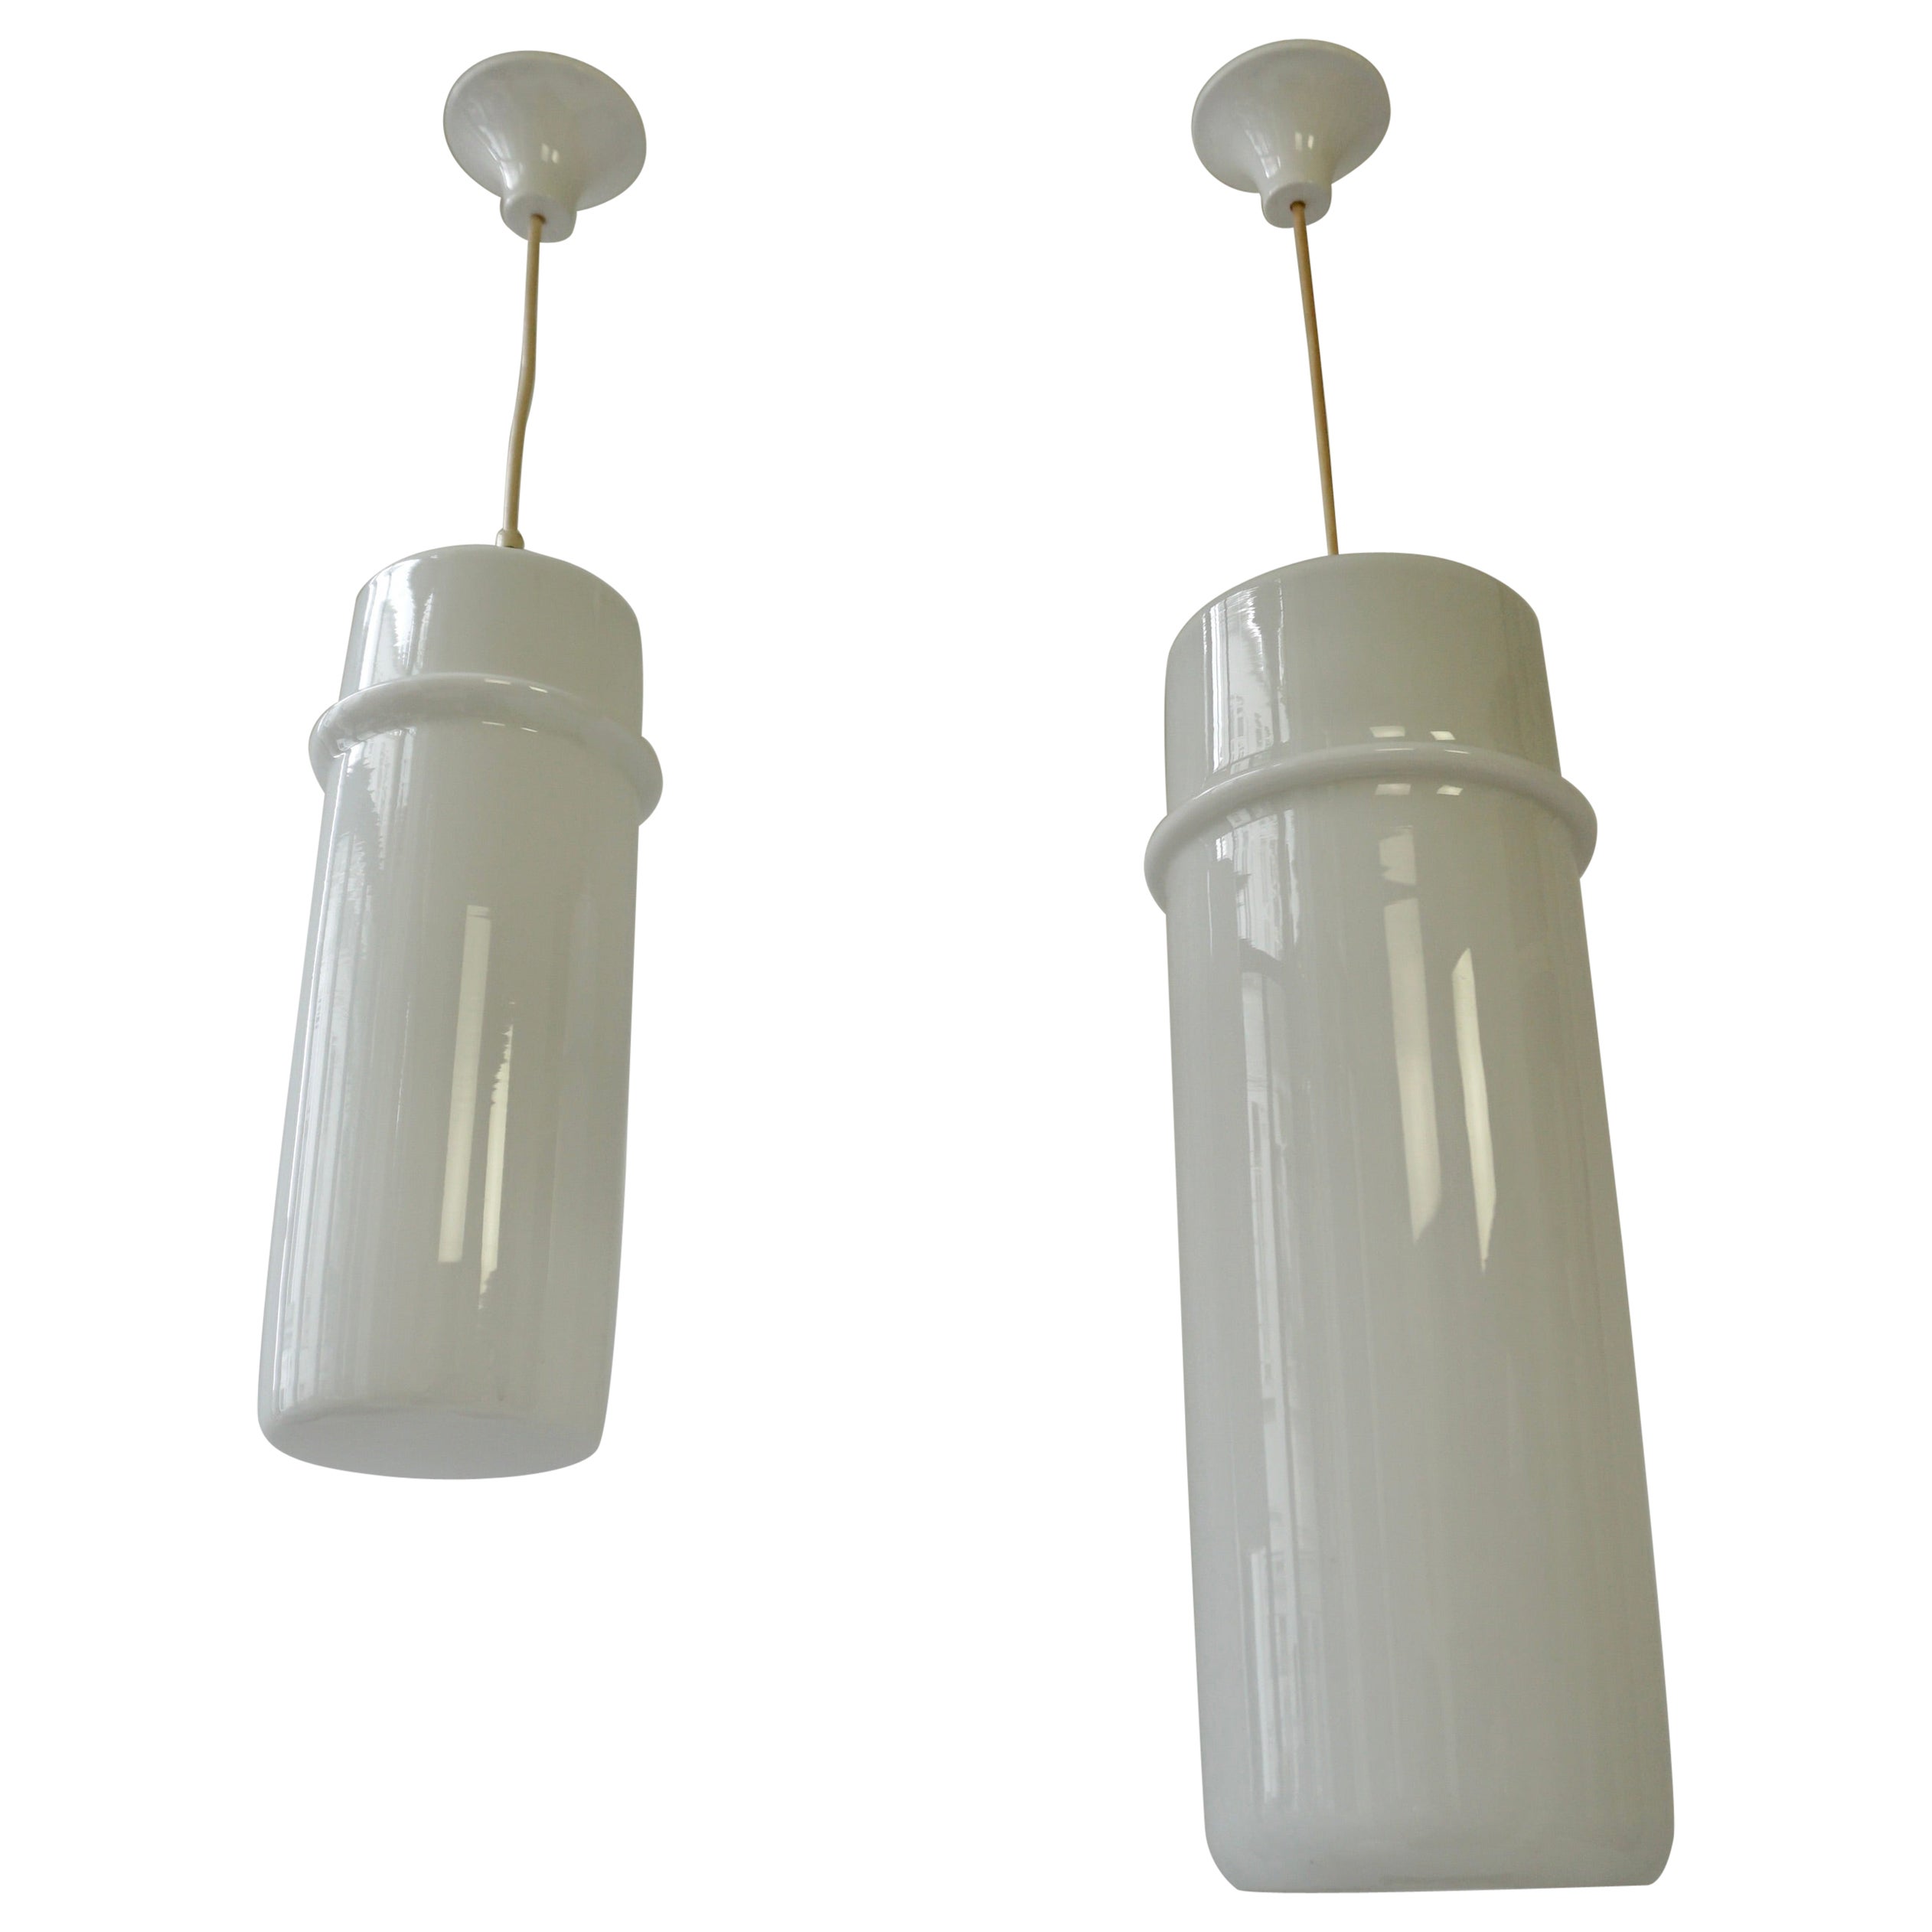 Two Stilnovo Pendant Lamps in Murano Glass and Brass, Italy, 1960s.